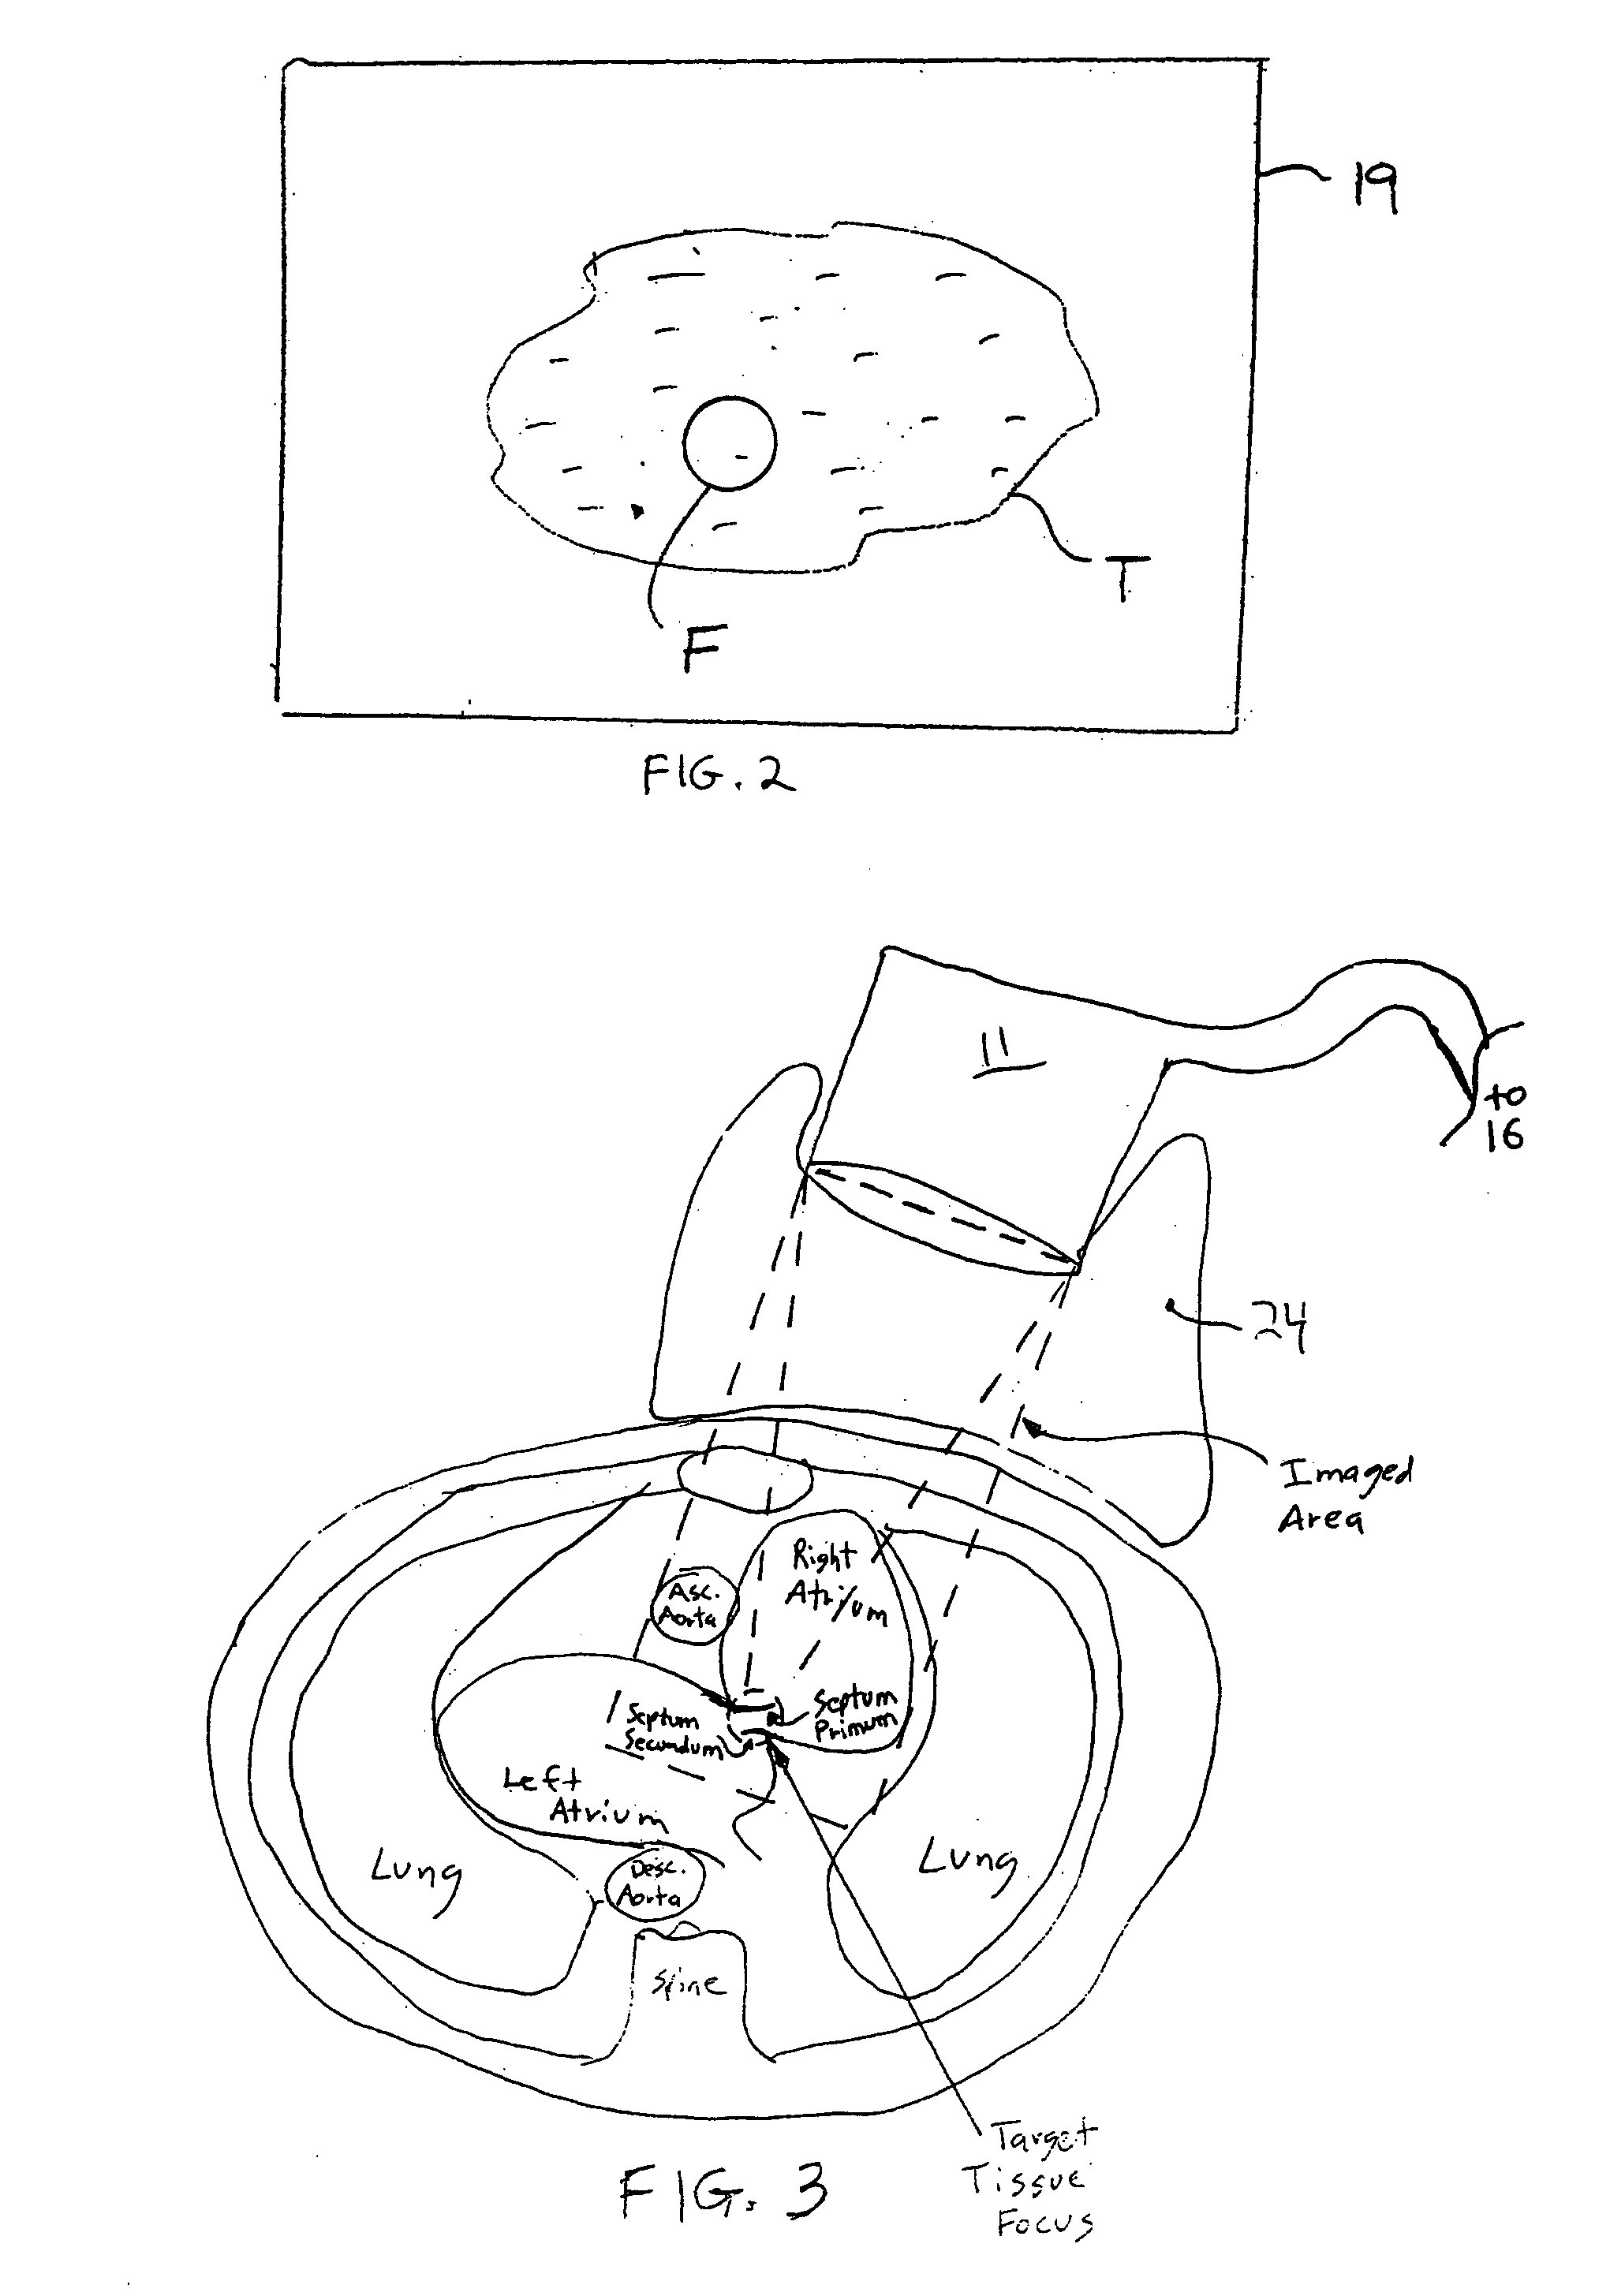 Methods and apparatus for non-invasively treating atrial fibrillation using high intensity focused ultrasound